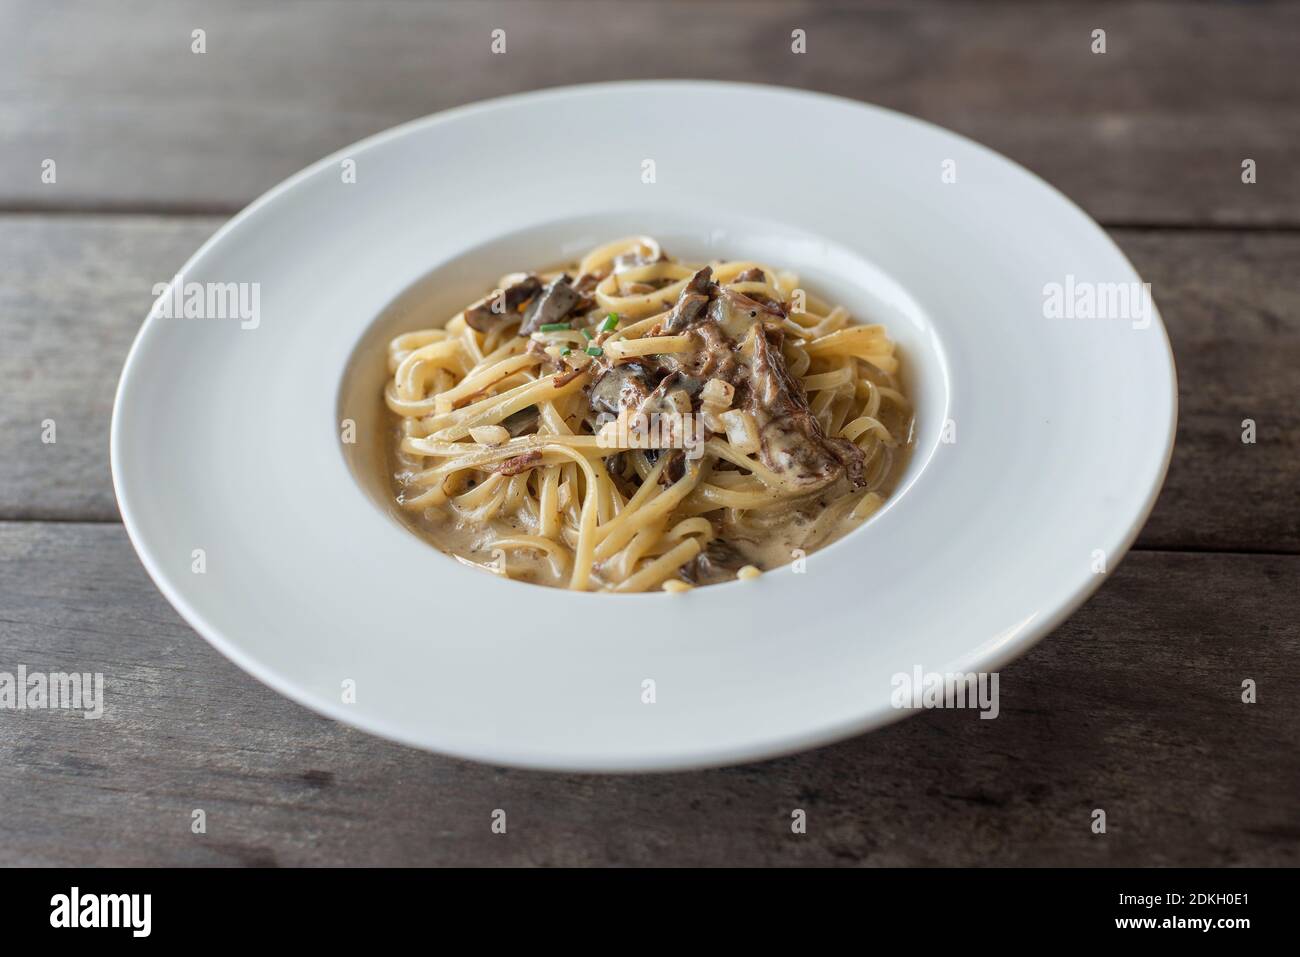 Close-up Of Noodles In Plate On Table Stock Photo